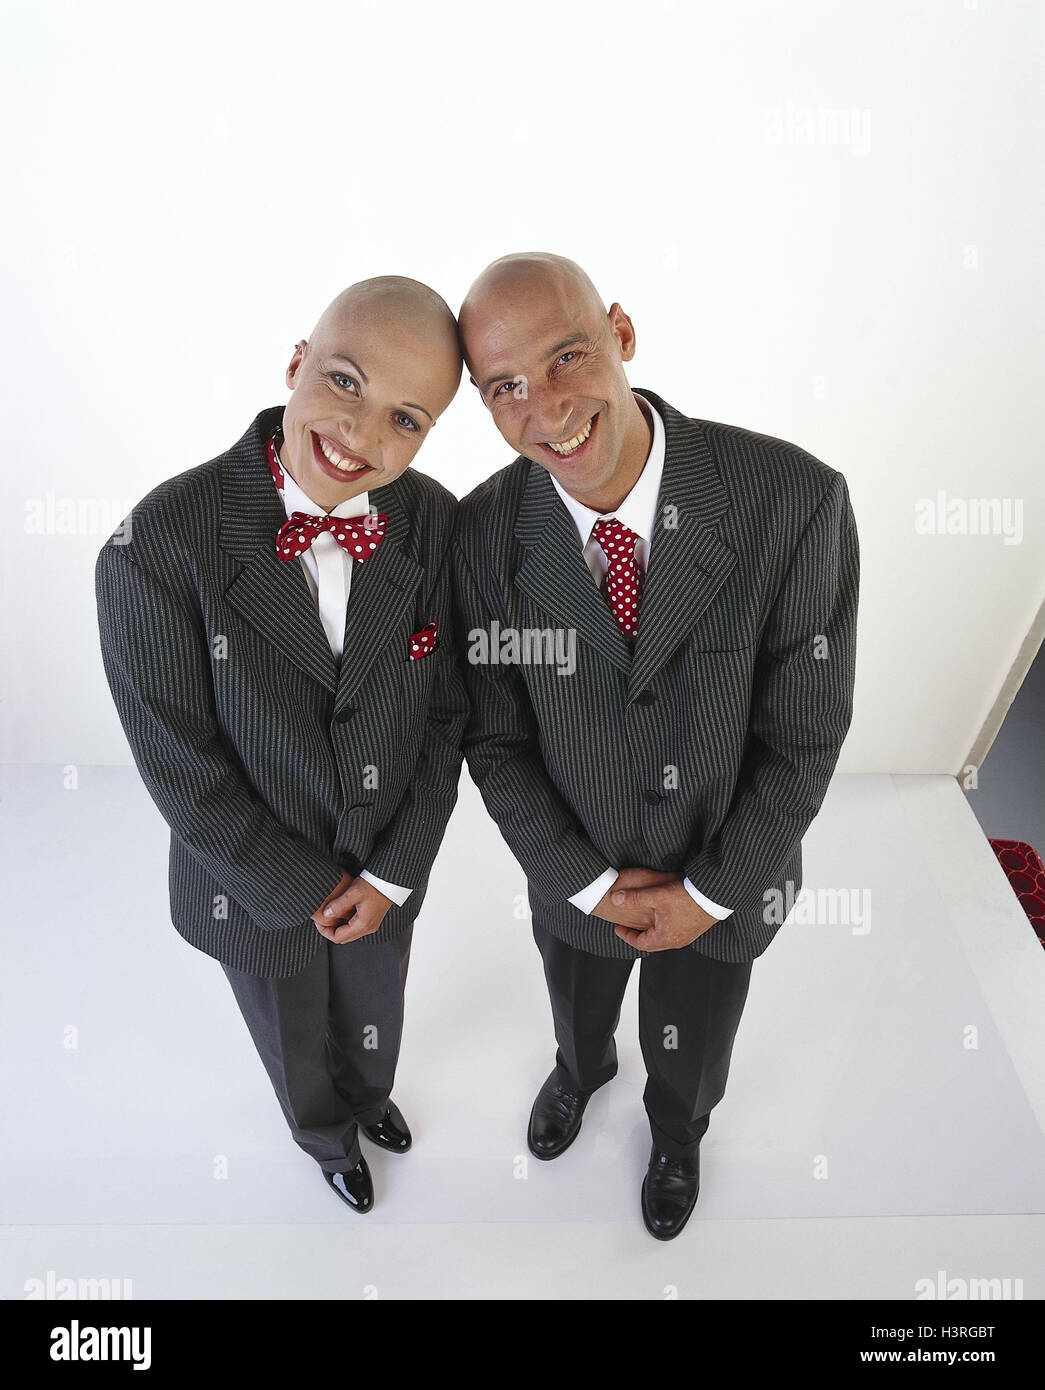 Couple, bald head, suit, smile pinstripe suit, partner's look, stand, inside, studio, cut out, from above Stock Photo